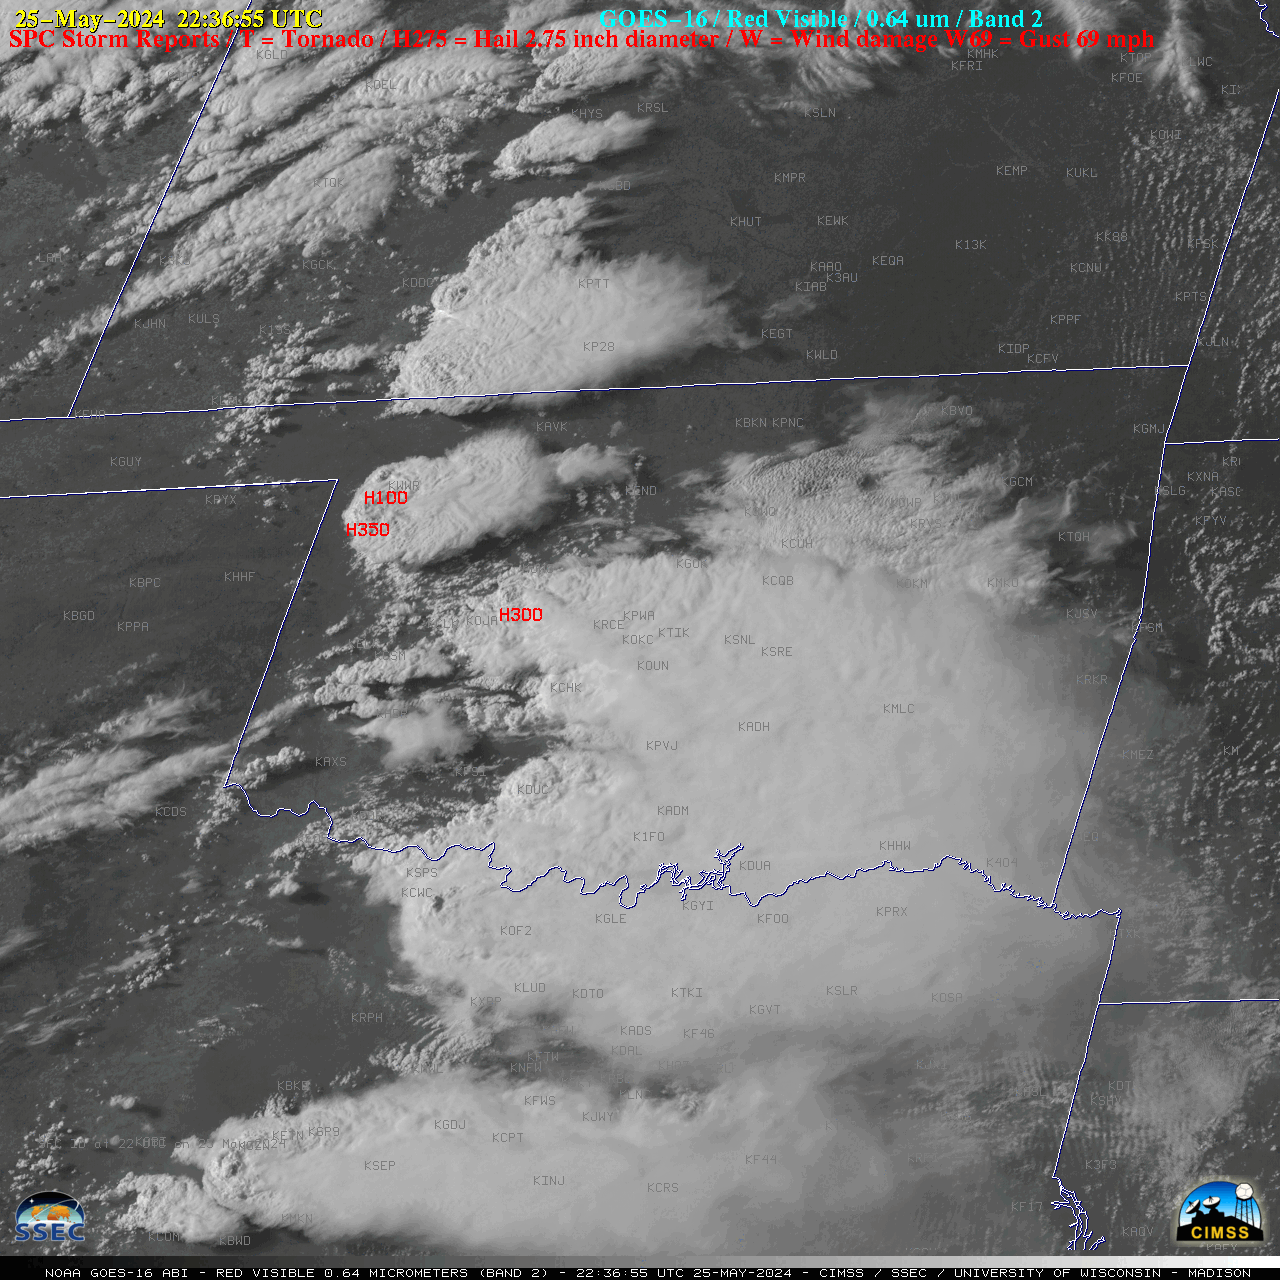 GOES-16 Visible images + SPC Storm Reports